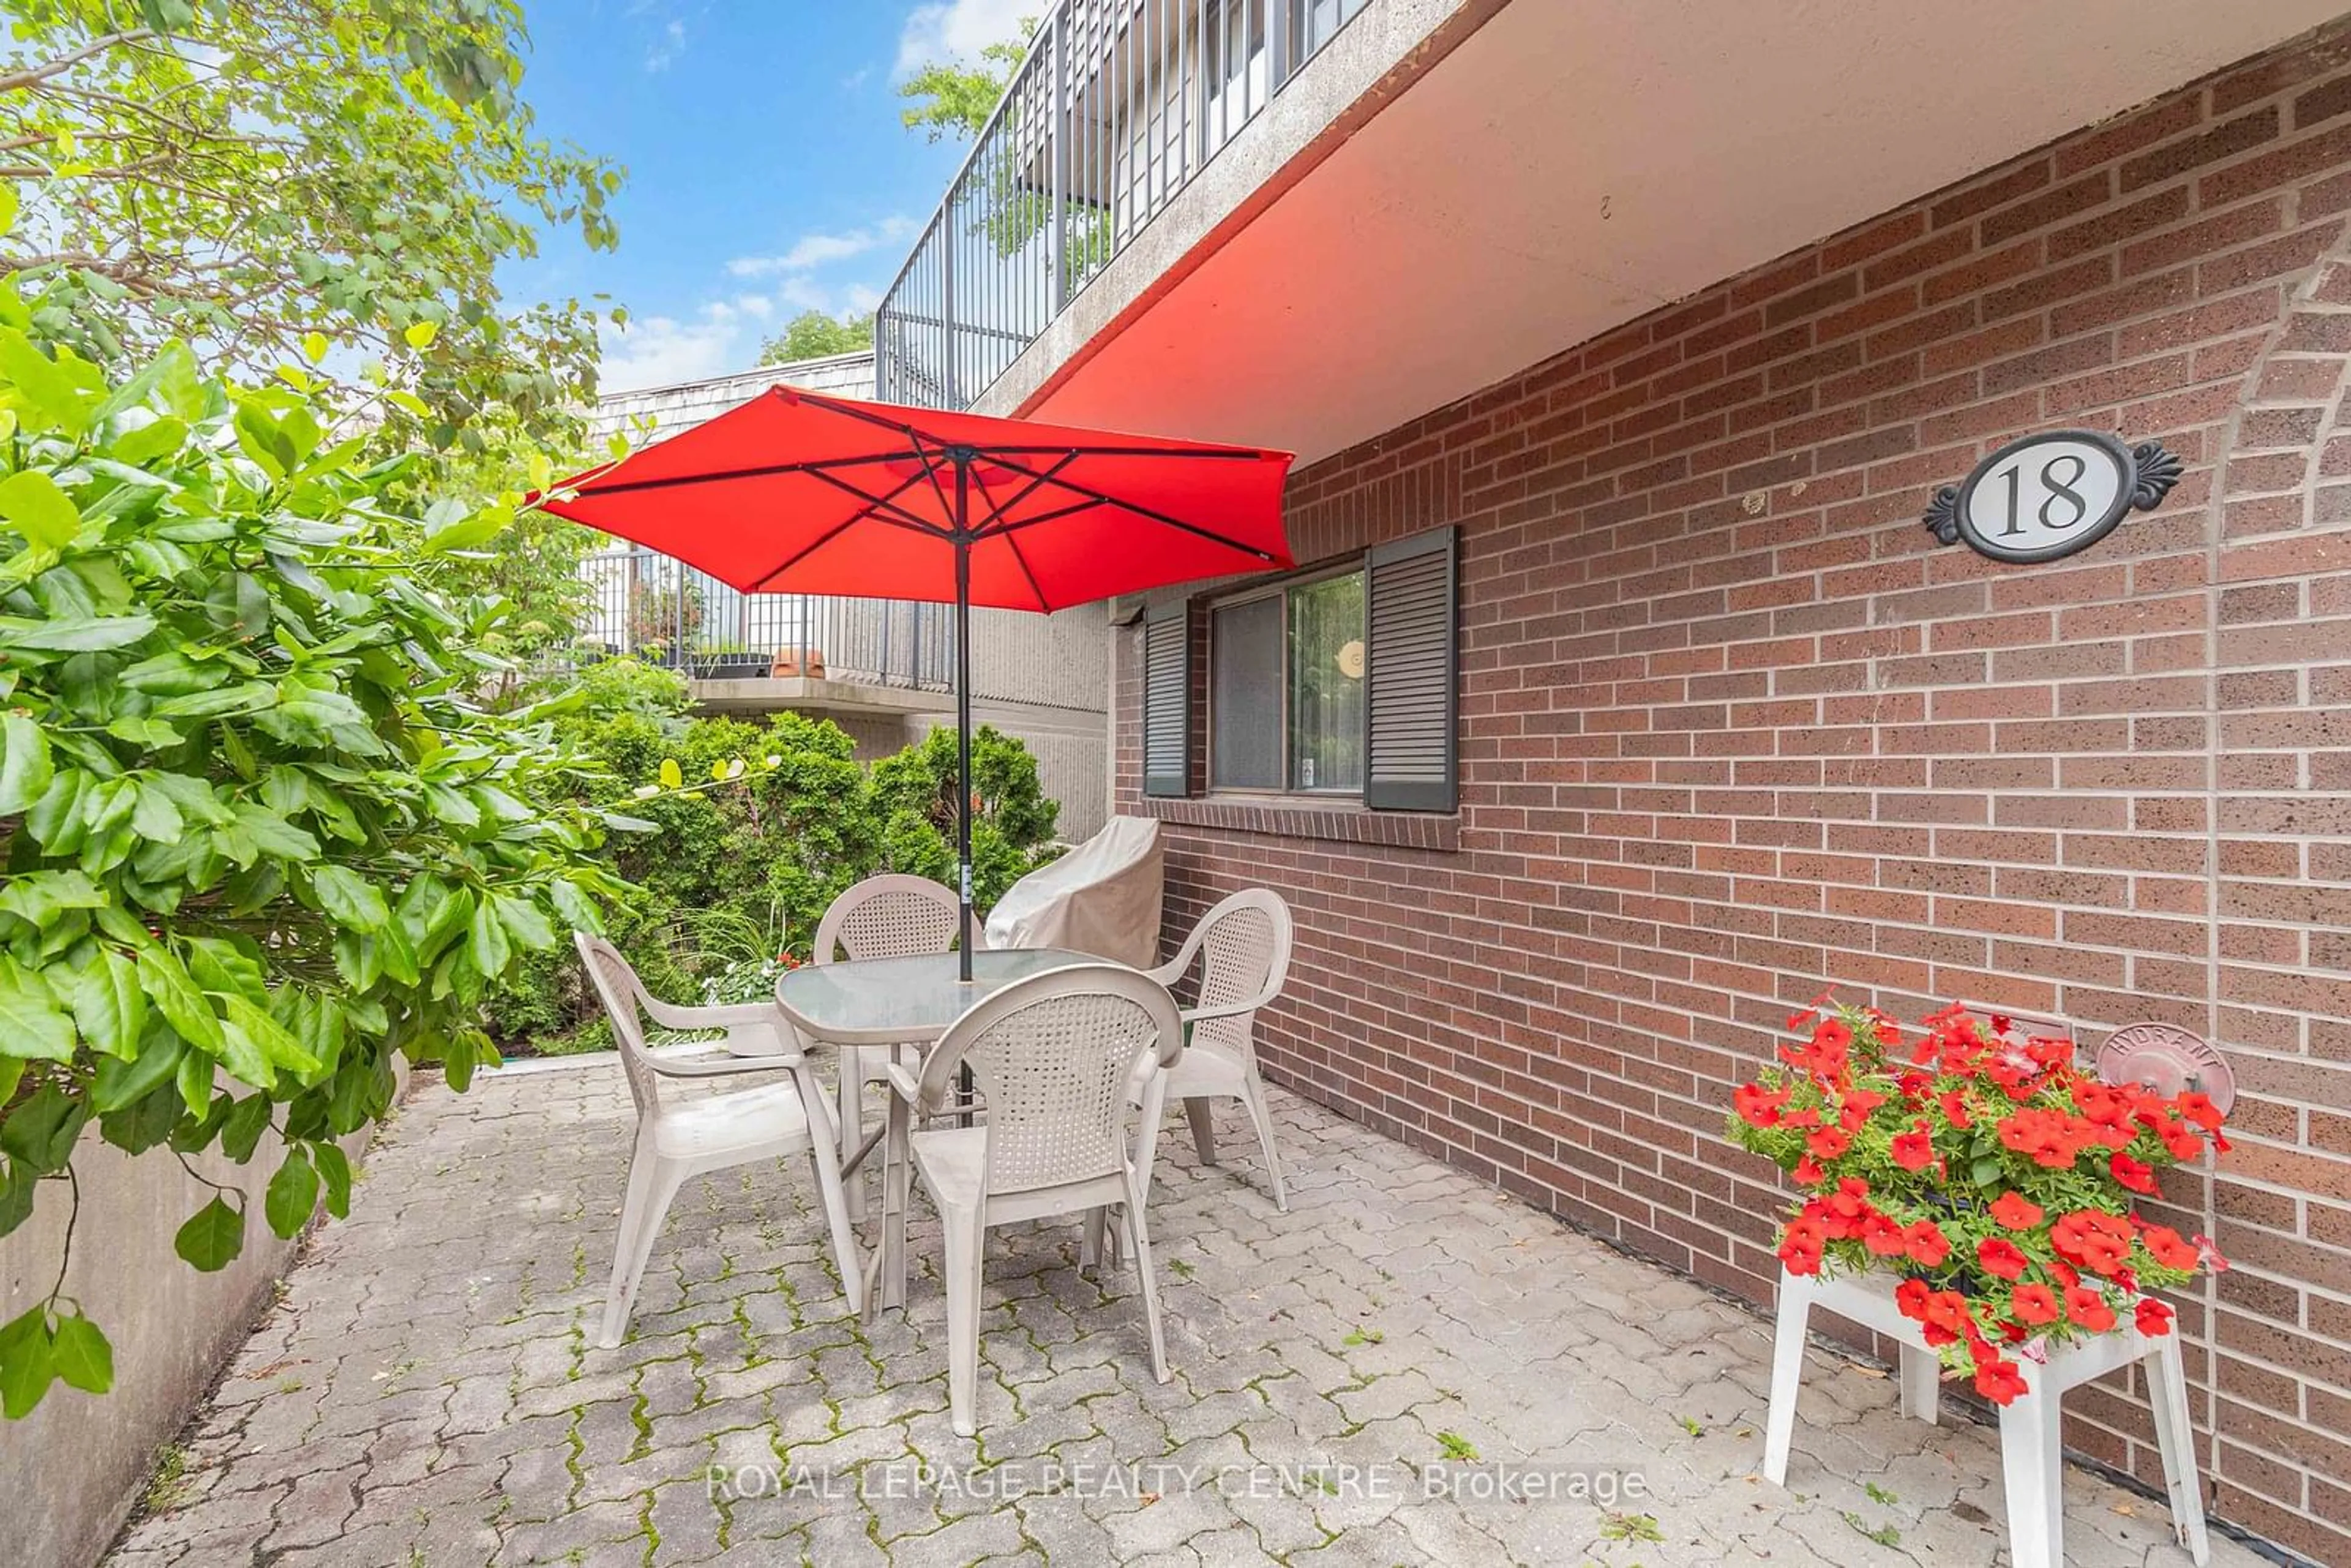 Patio for 1330 Mississauga Valley Blvd #18, Mississauga Ontario L5A 3T1